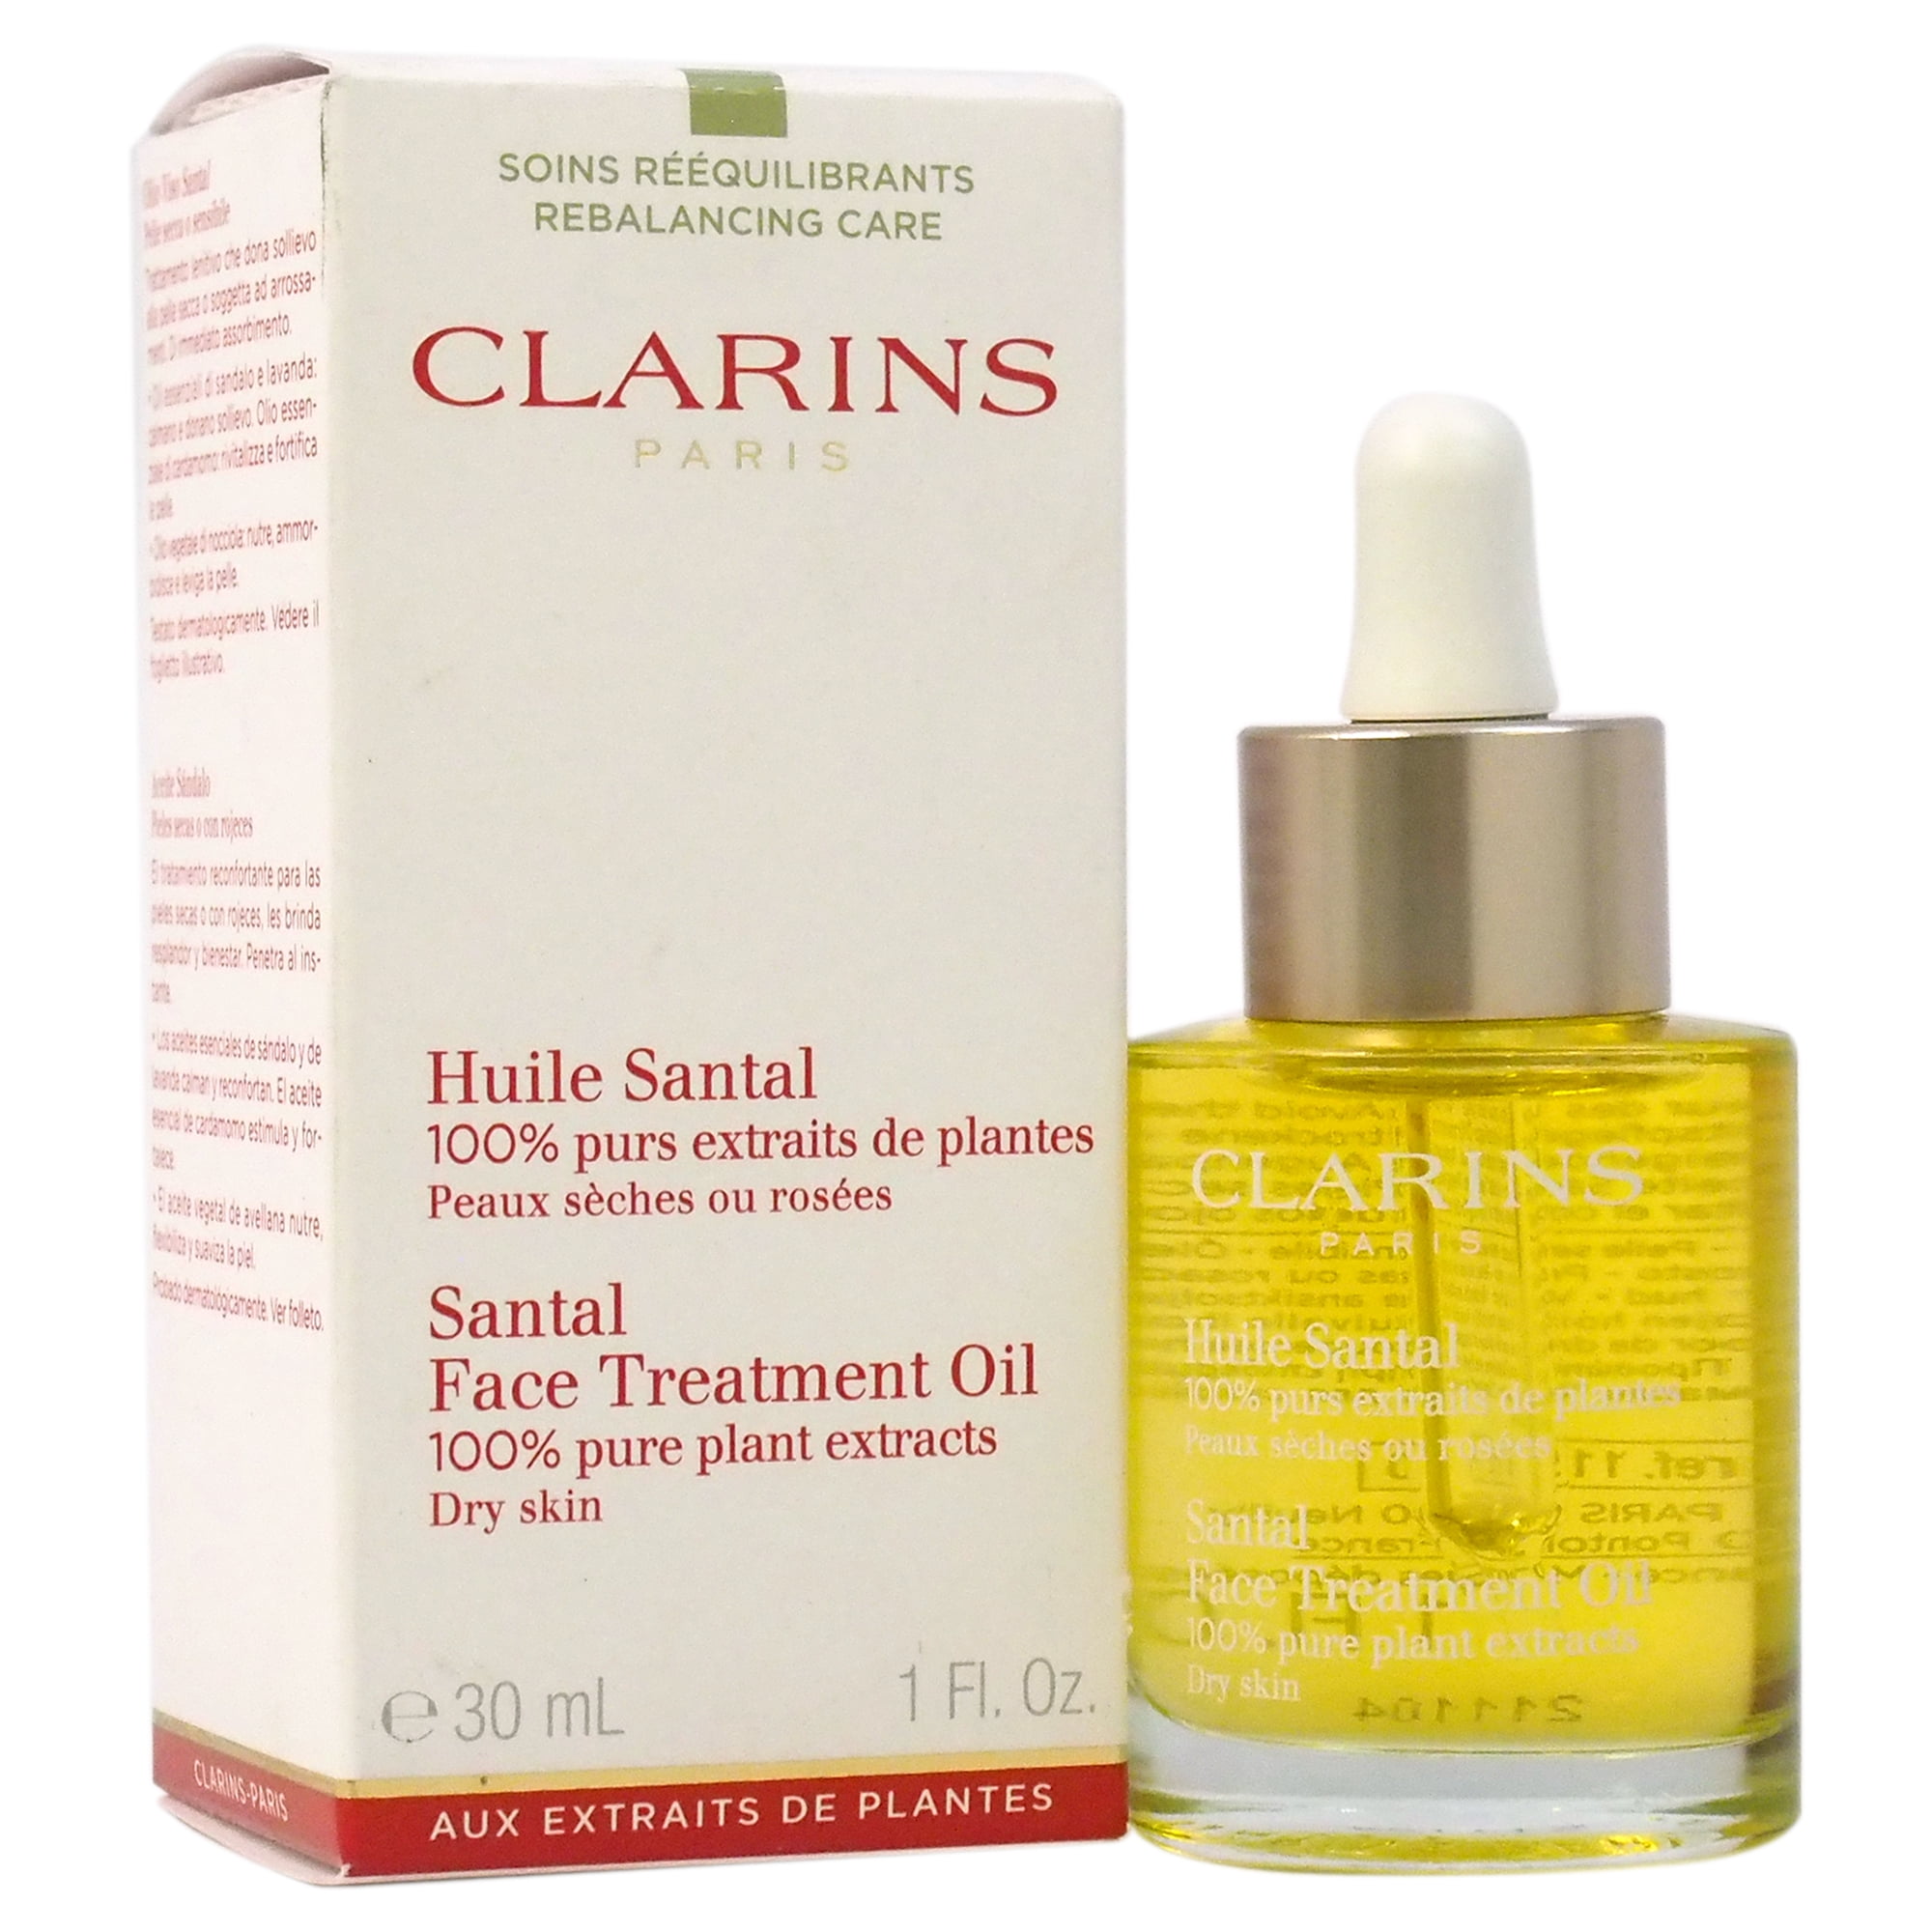 Clarins - Santal  approach Treatment Oil - Dry Skin by Clarins  